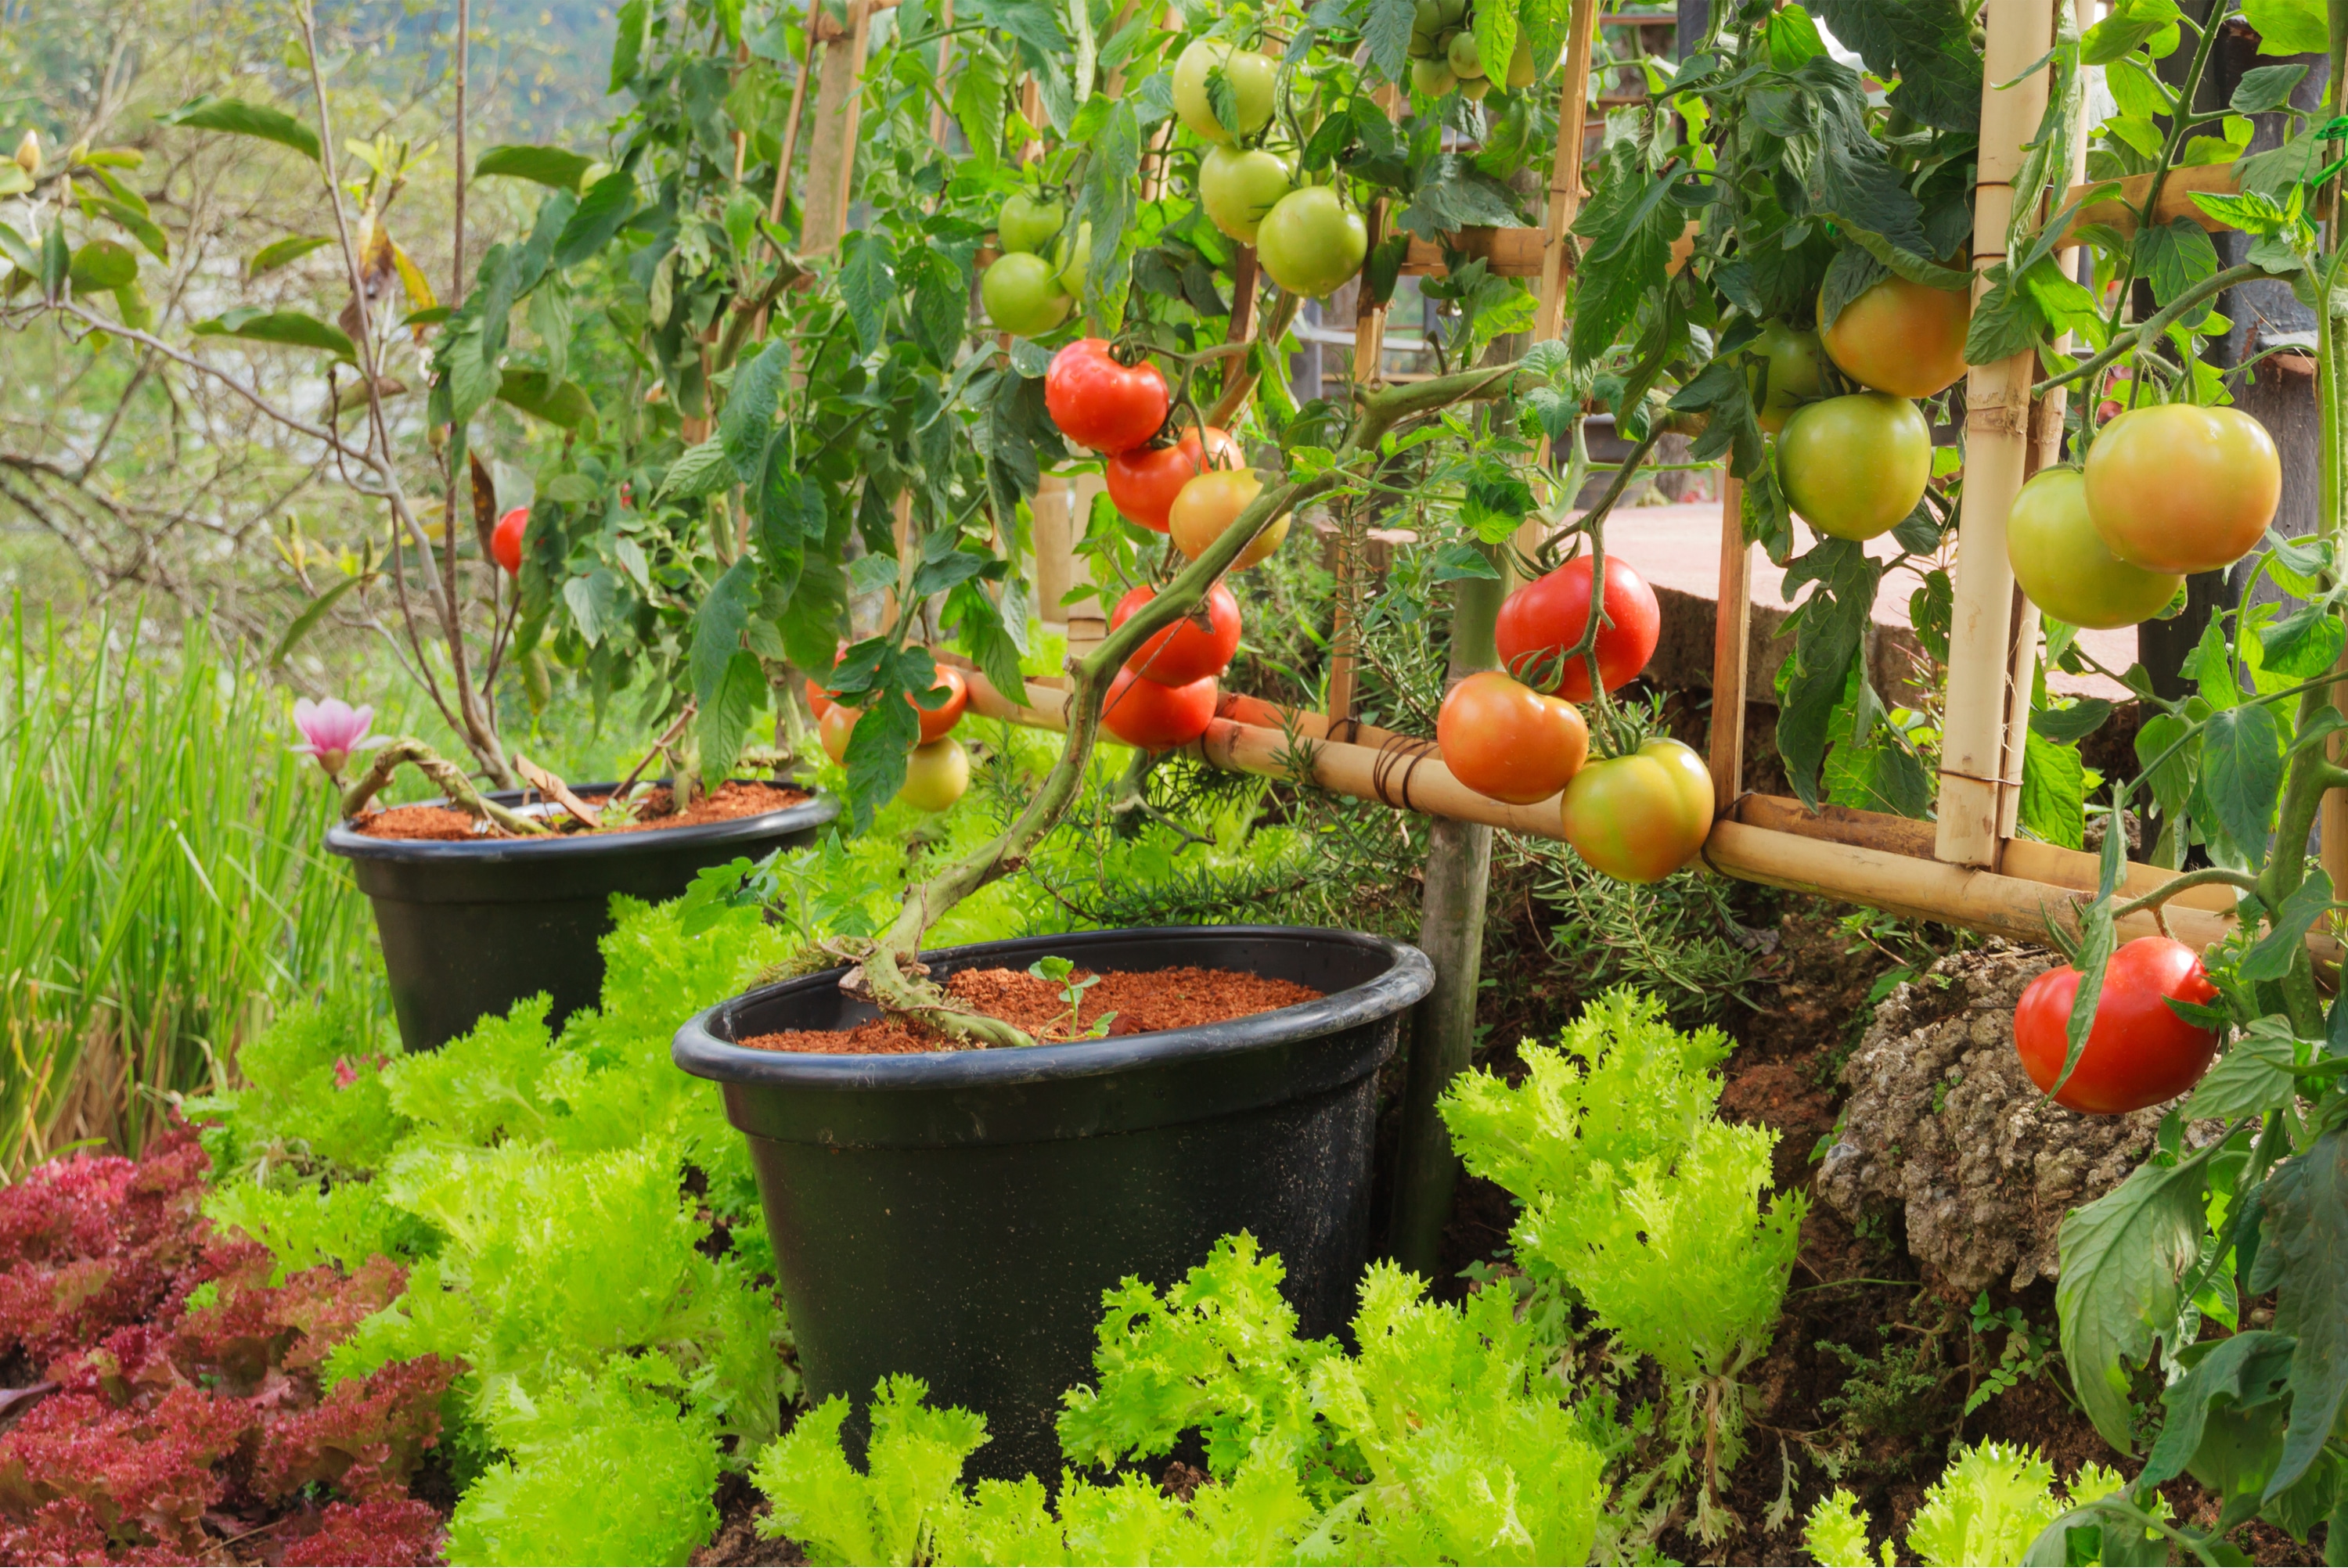 How To Grow Your Own Food With Container Vegetable Gardening